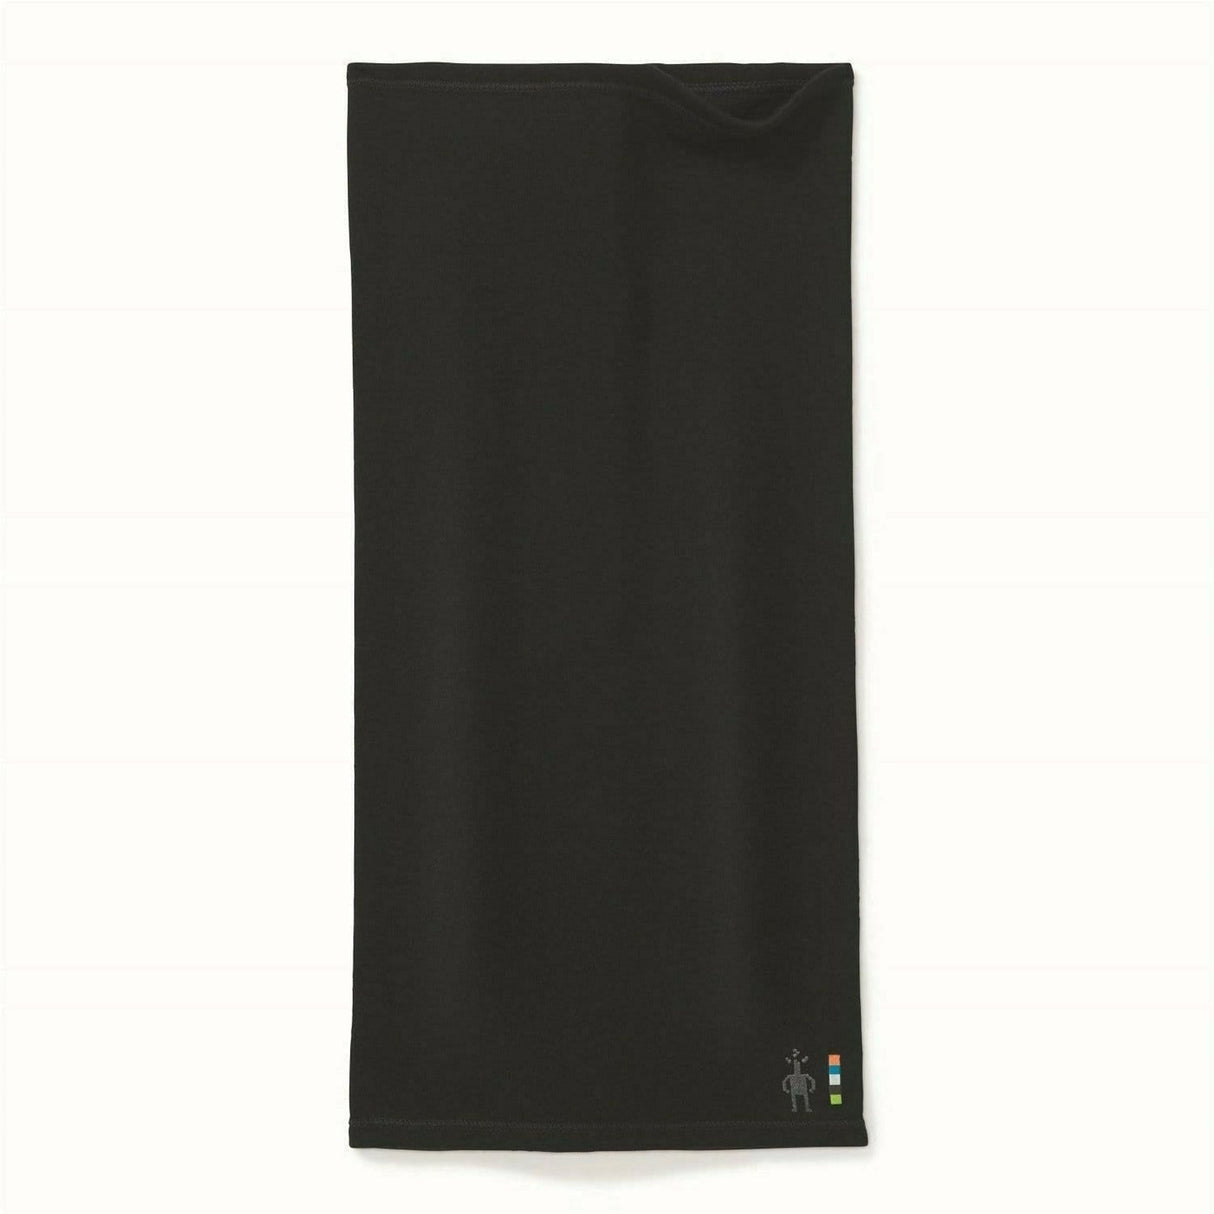 Smartwool Merino 250 Long Neck Gaiter  -  One Size Fits Most / Black